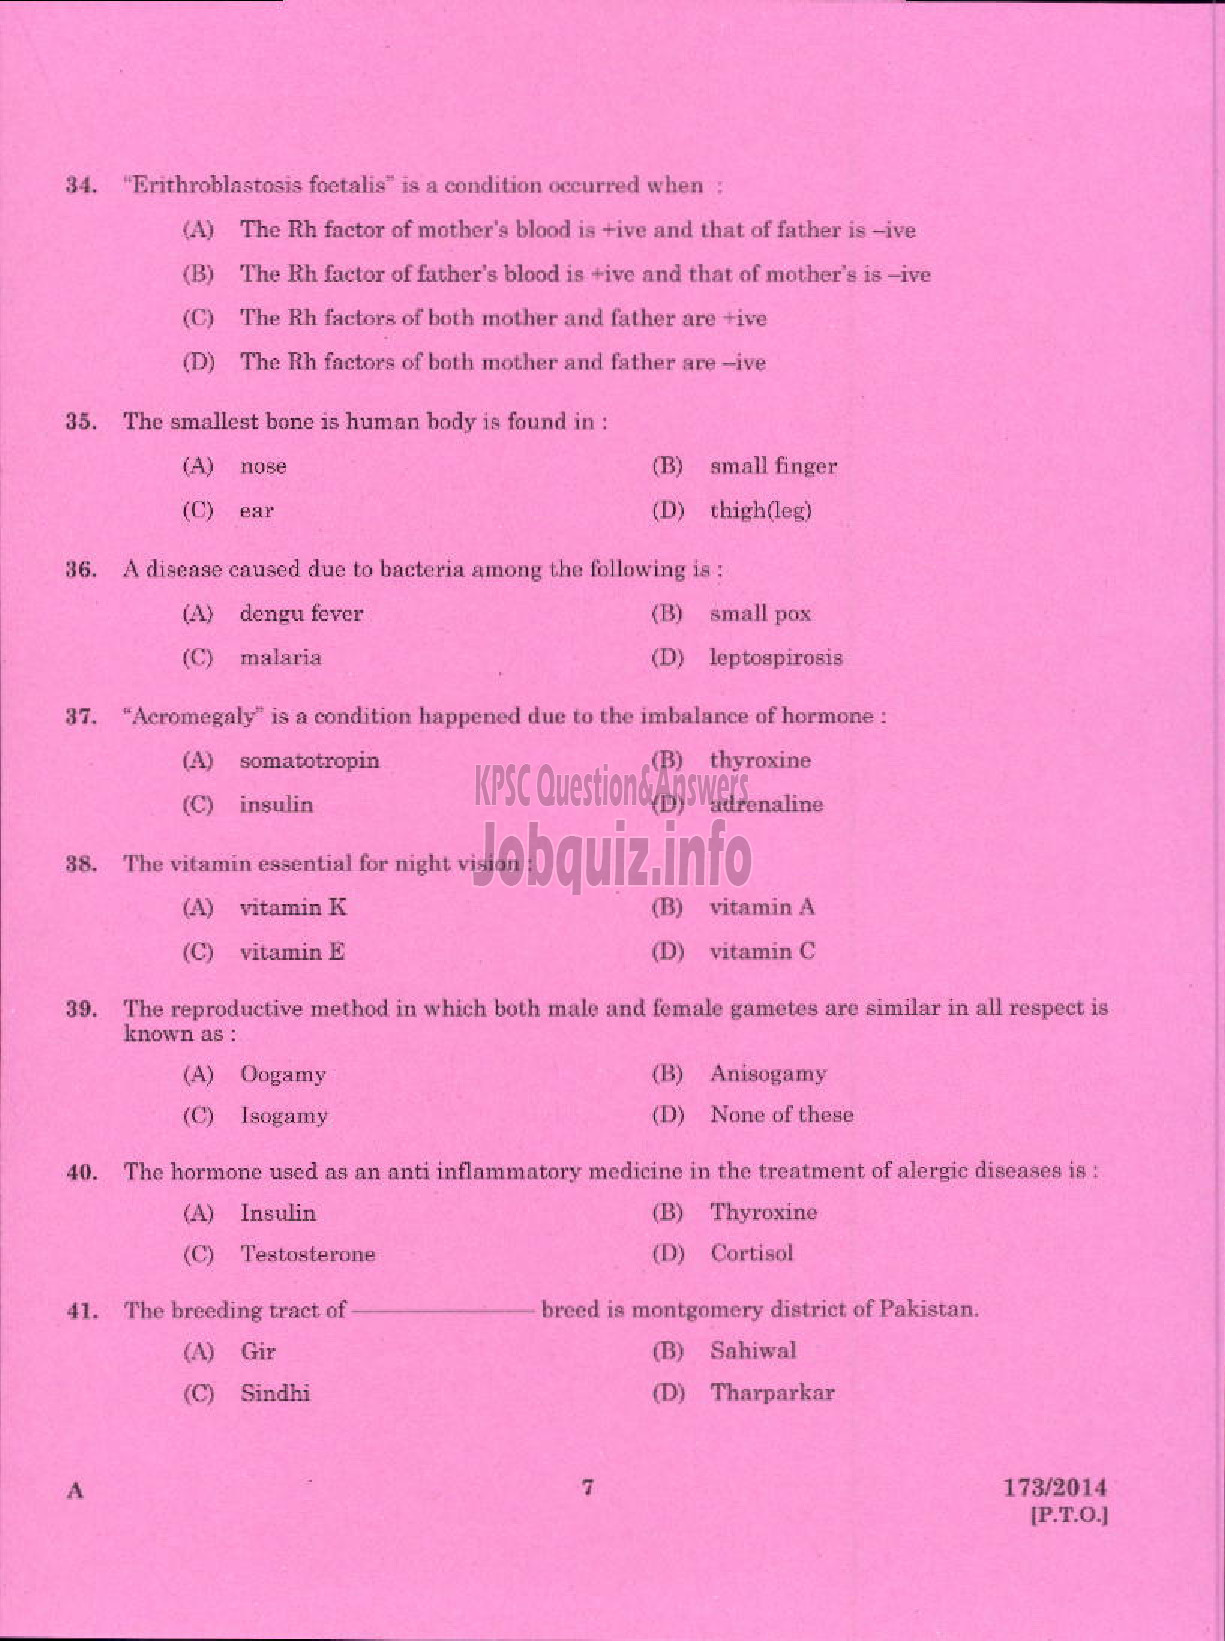 Kerala PSC Question Paper - LIVE STOCK INSPECTOR GR II / POULTRY ASSISTANT / MILK RECORDER / STORE KEEPER / ENUMERATOR NCA ANIMAL HUSBANDRY-5